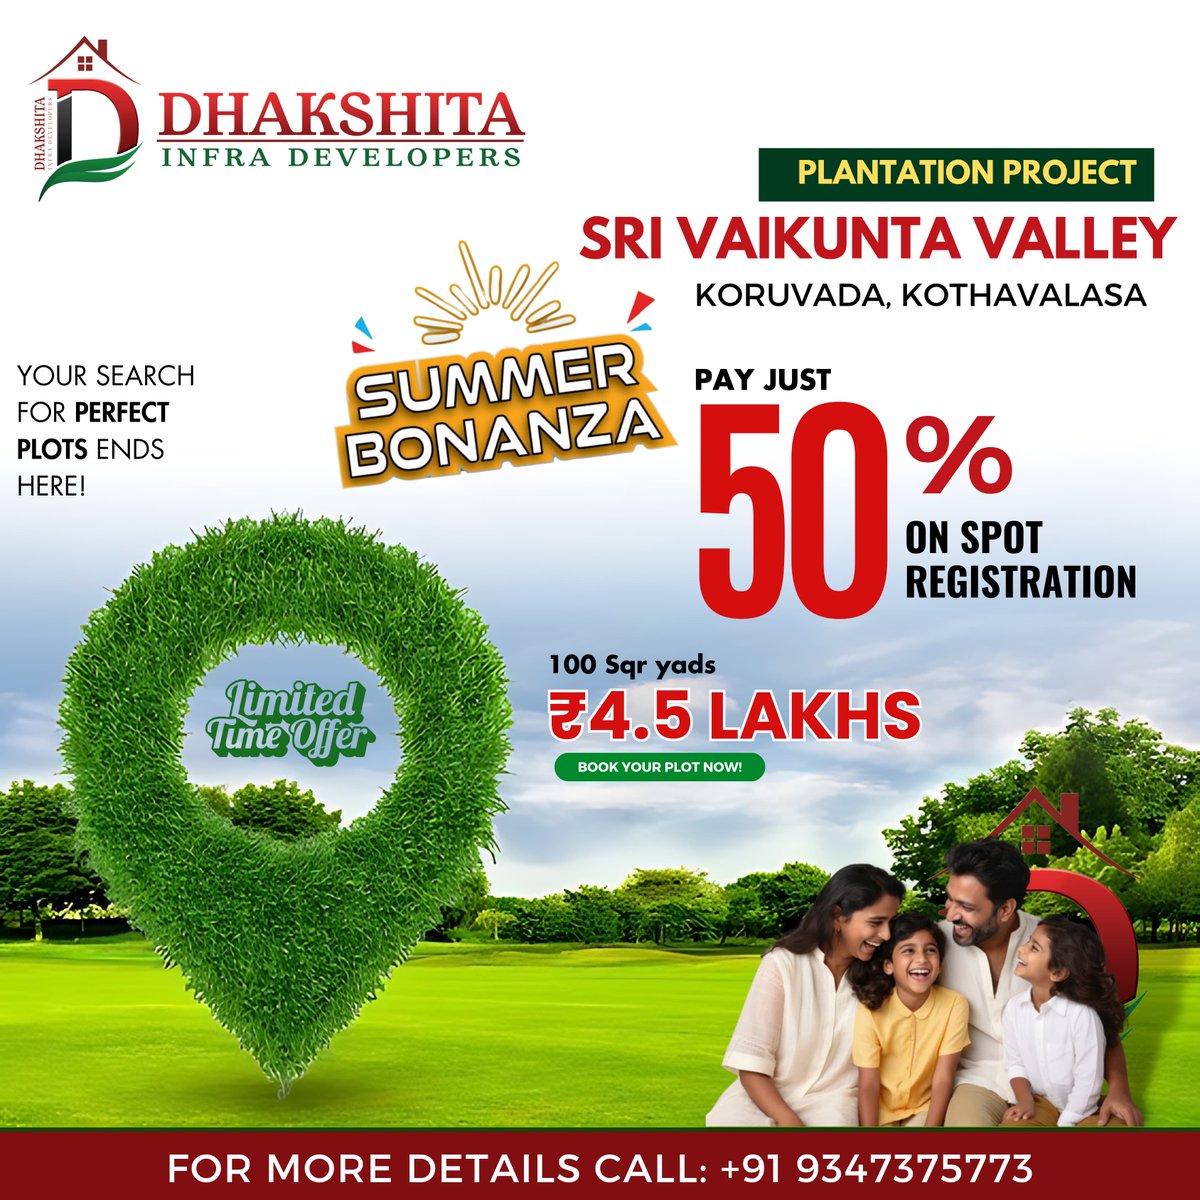 Discover your perfect plot with Dhakshita Infra Developers! Your search for the ideal piece of land ends here. 🌳🏡

More information: +91 9347375773

#DhakshitaInfraDevelopers #PerfectPlots #RealEstate #LandForSale #PlotForSale #PropertyInvestment #LandInvestment